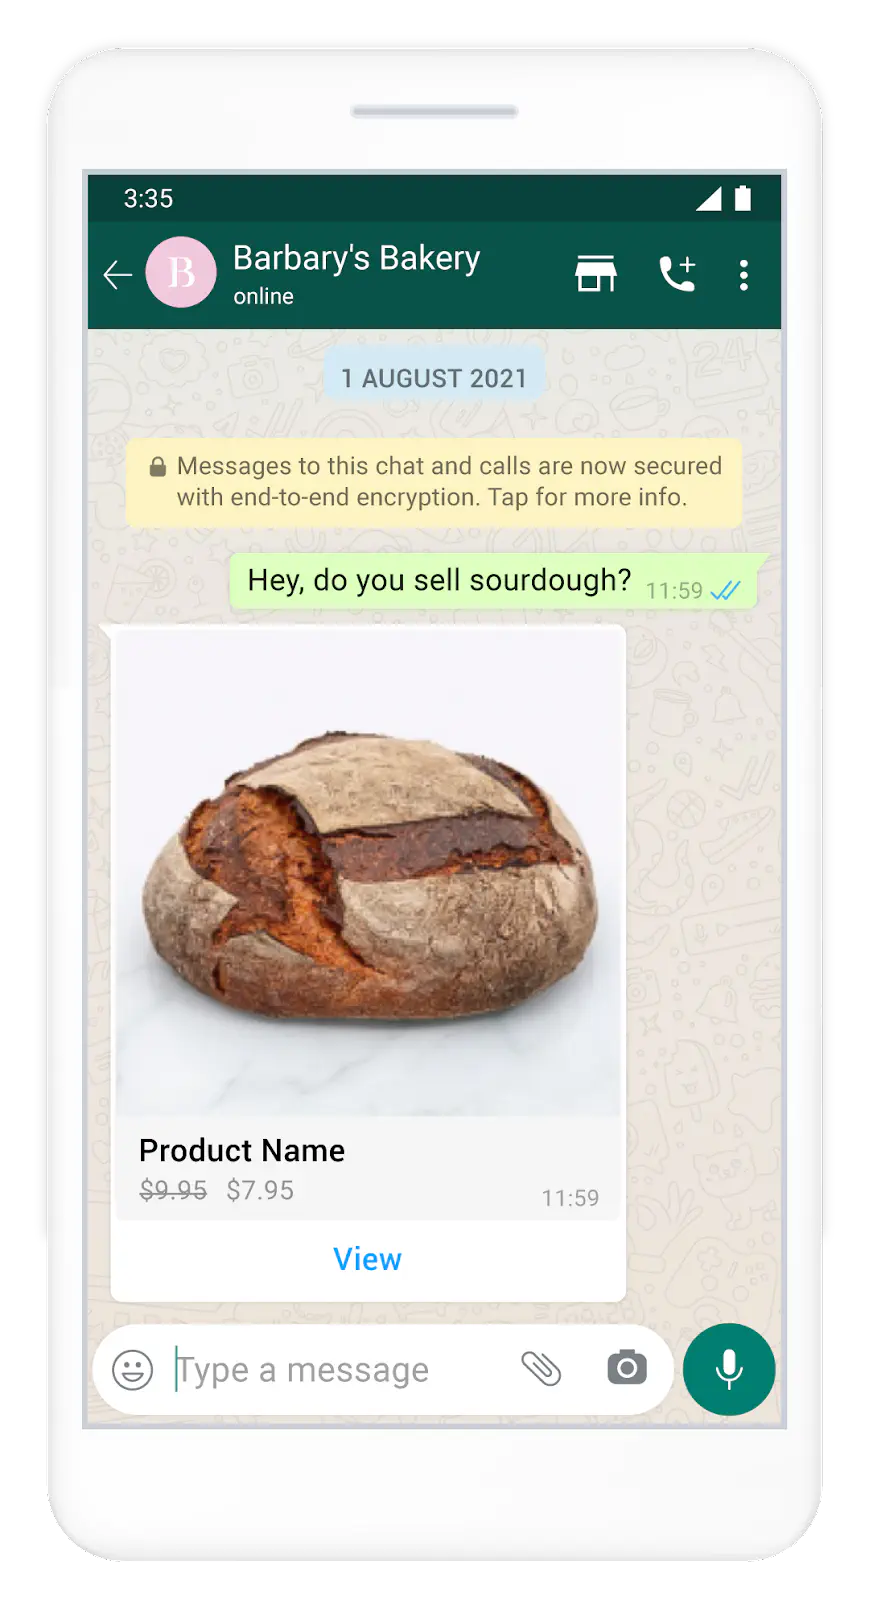 A single-product message in a WhatsApp conversation with a customer.